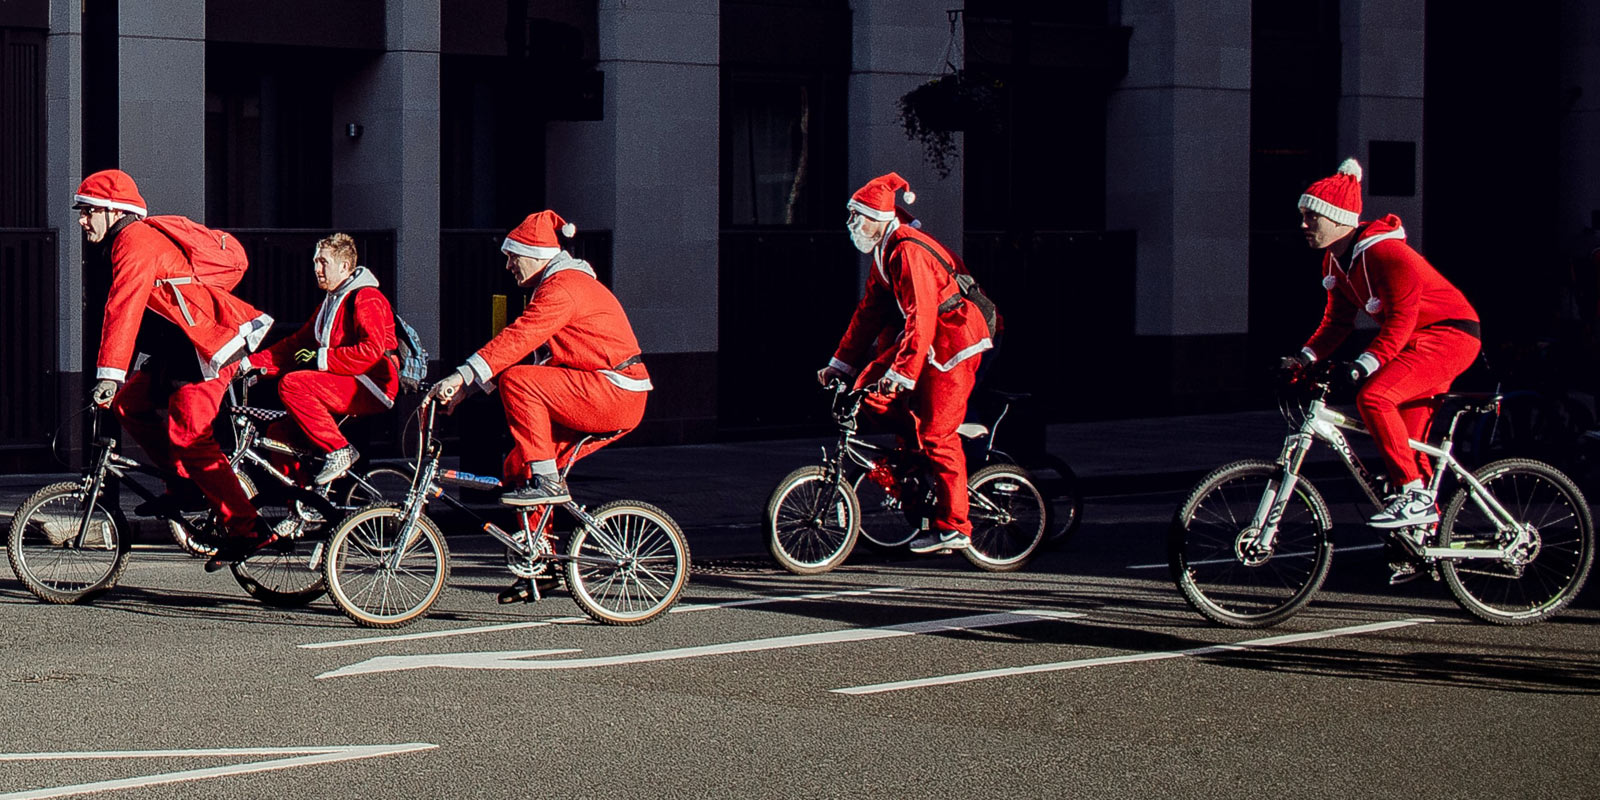 Christmas Gifts for Cyclists